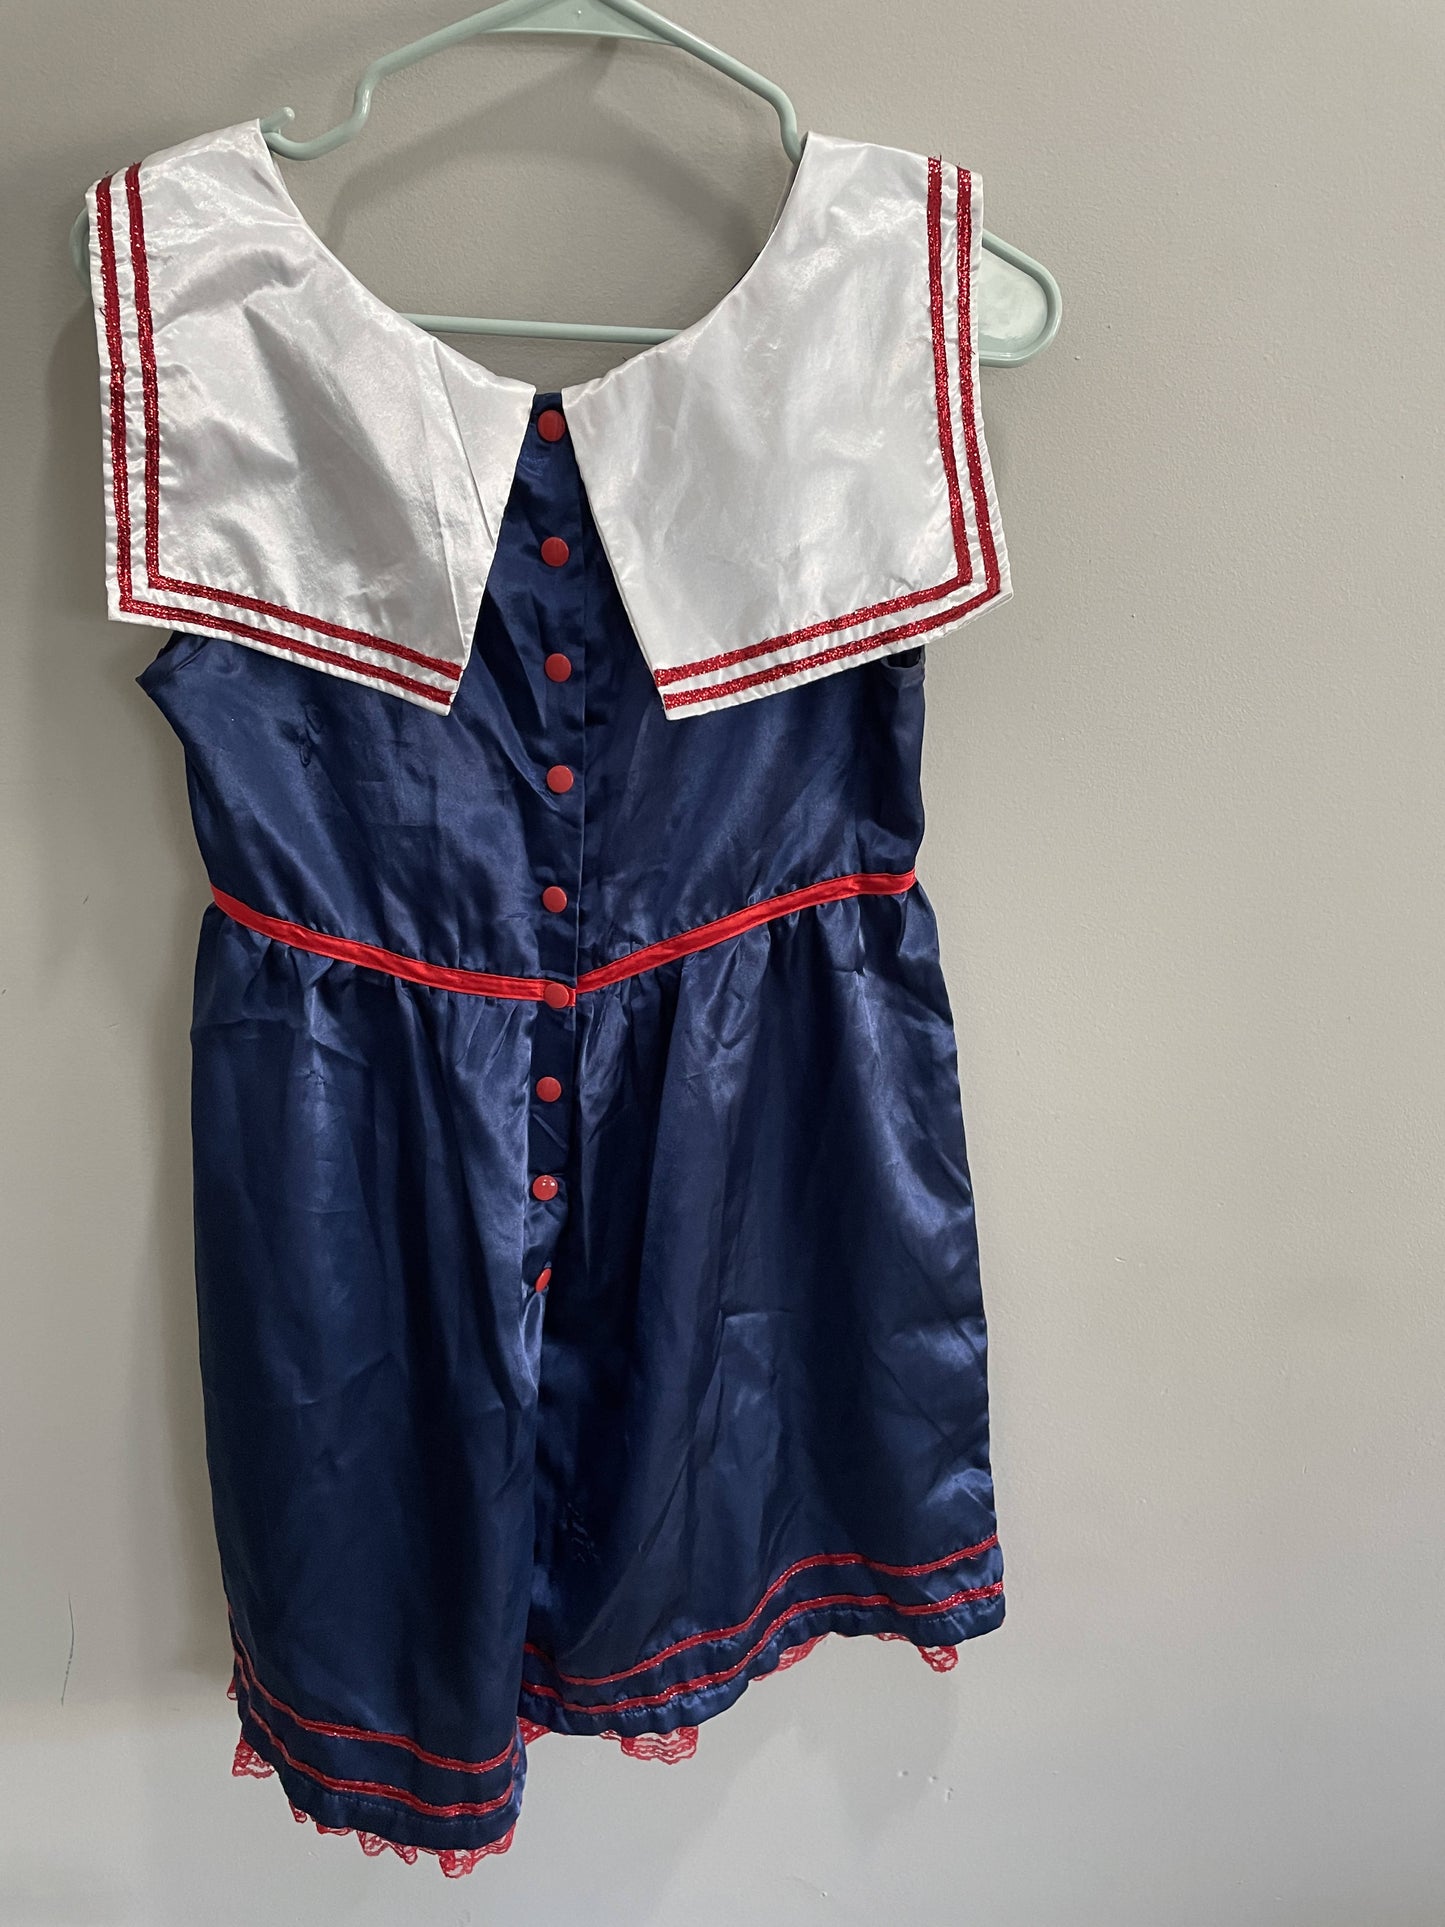 Sailor dress and hat